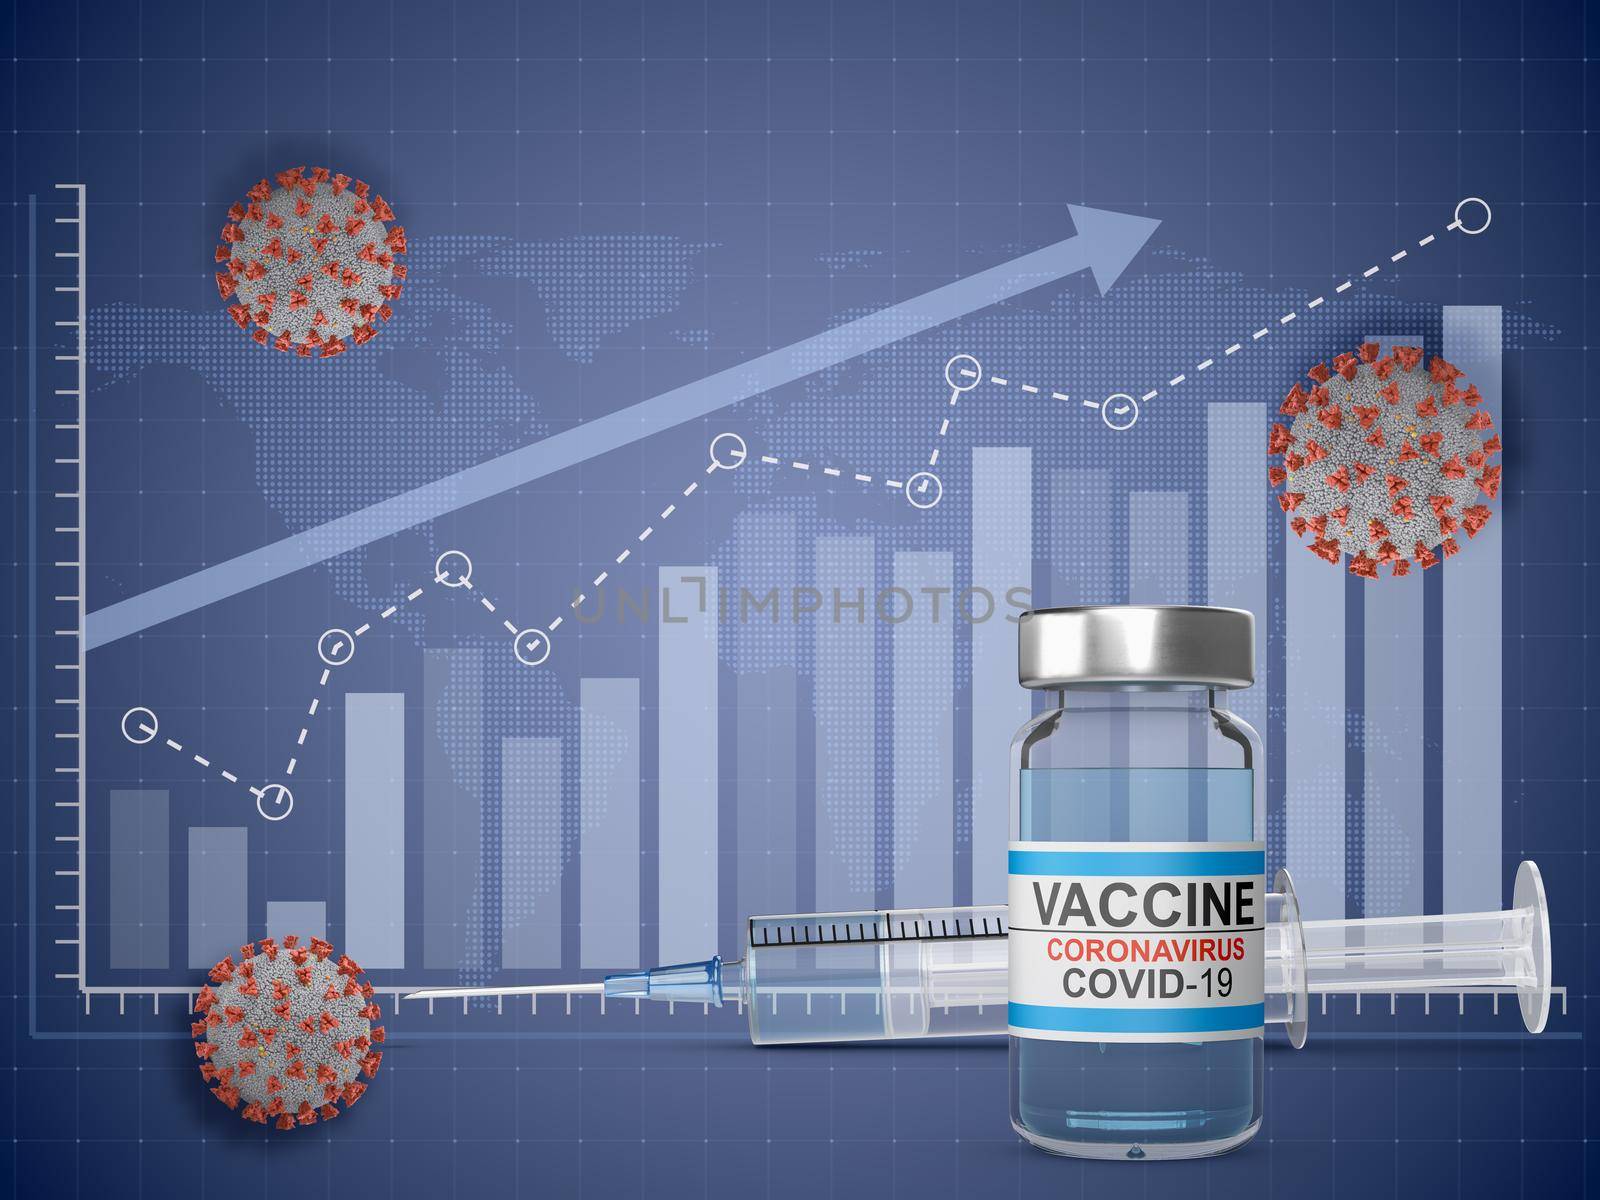 Syringe, vaccine and coronaviruses on the background of the graphic. 3d render.